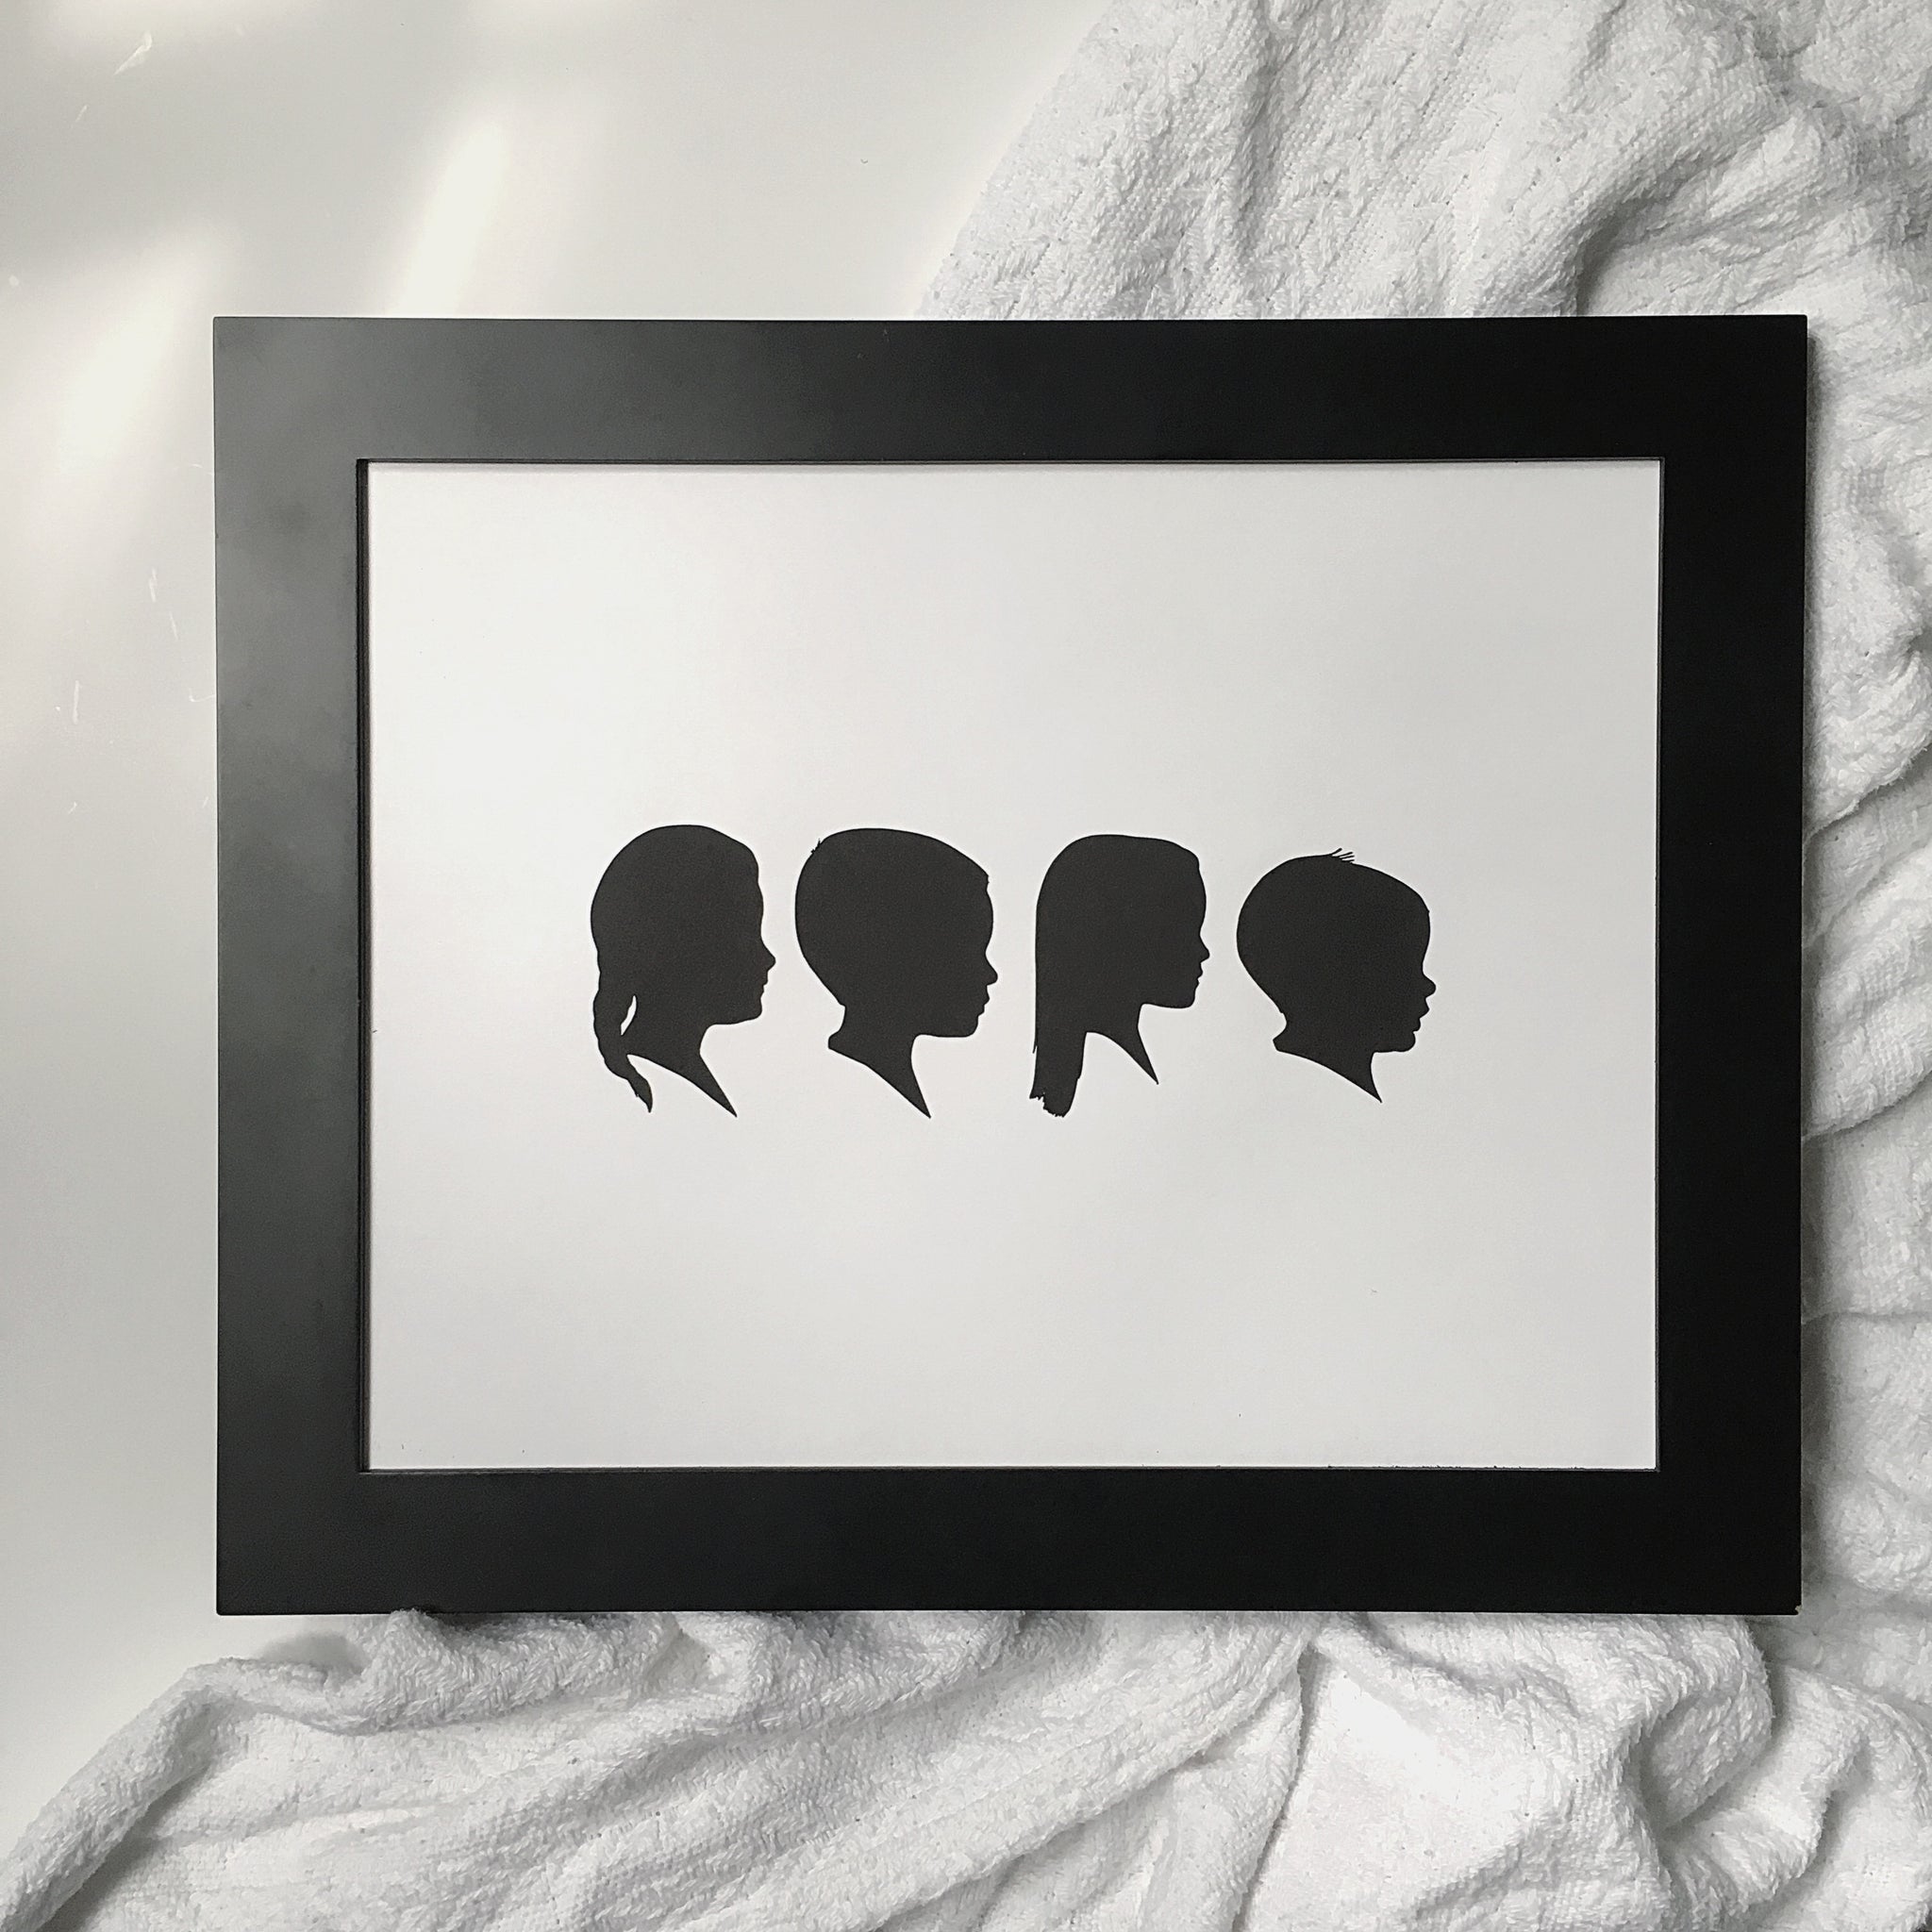 11x14" with Four Silhouette Paper-Cuts